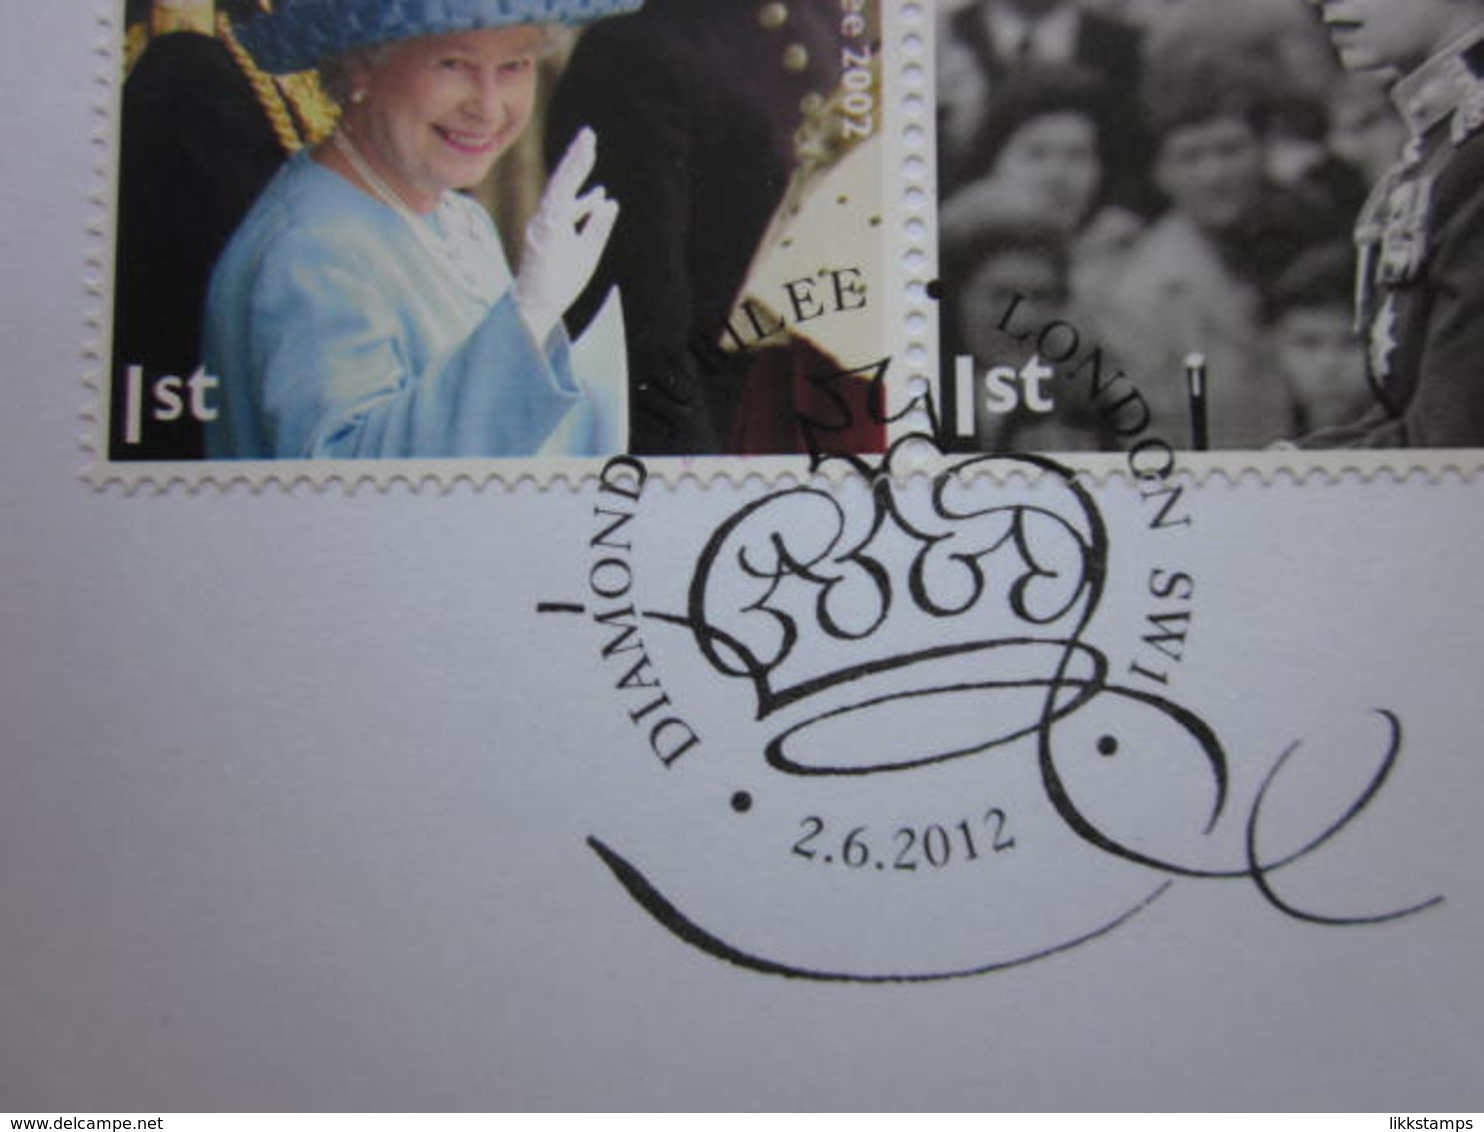 2012 THE QUEENS DIAMOND JUBILEE, A SPECIAL COMMEMORATIVE SOUVENIR COVER.(B) #01331 - 2011-2020 Decimal Issues